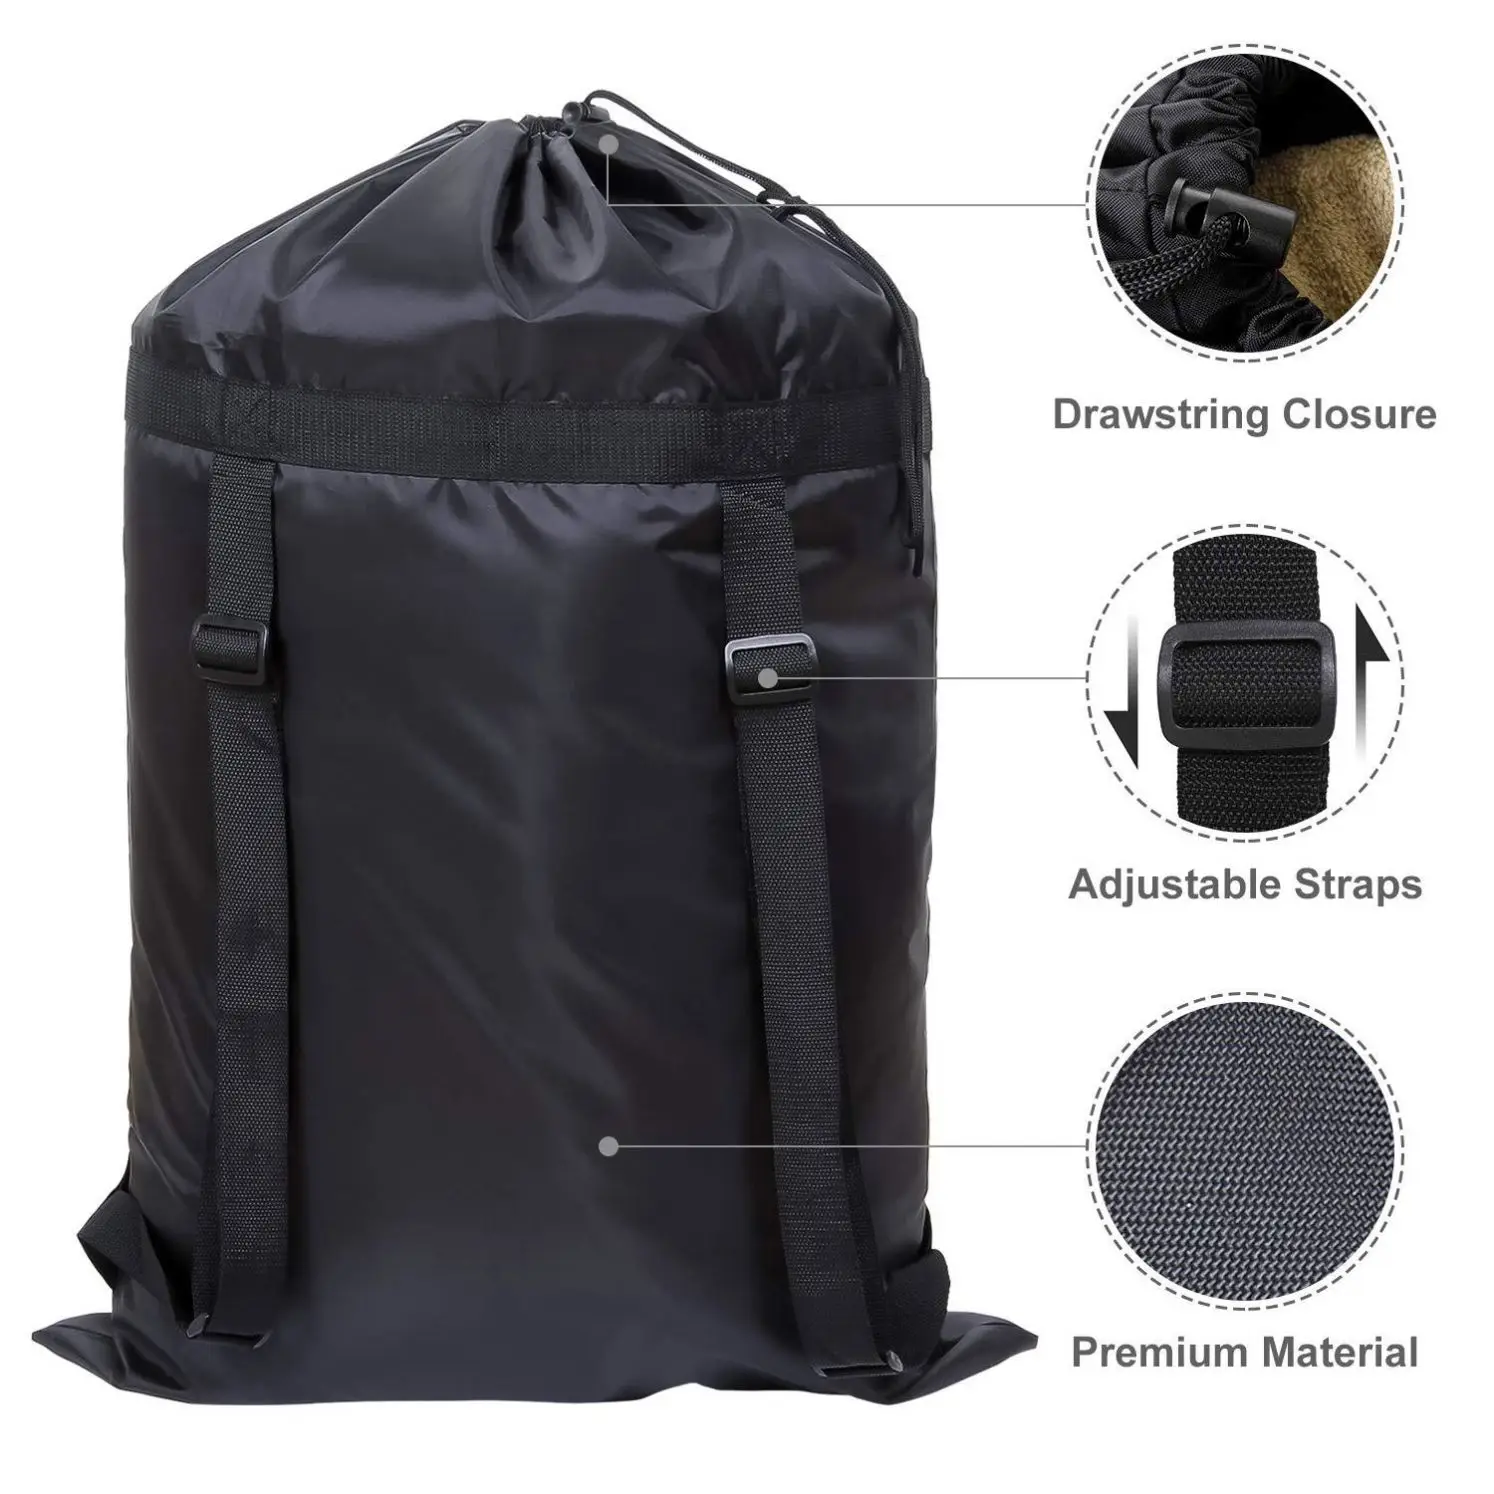 Hot Sale Polyester Waterproof Laundry Bag Large Camping Travel Clothes Storage Bag with drawstring closure